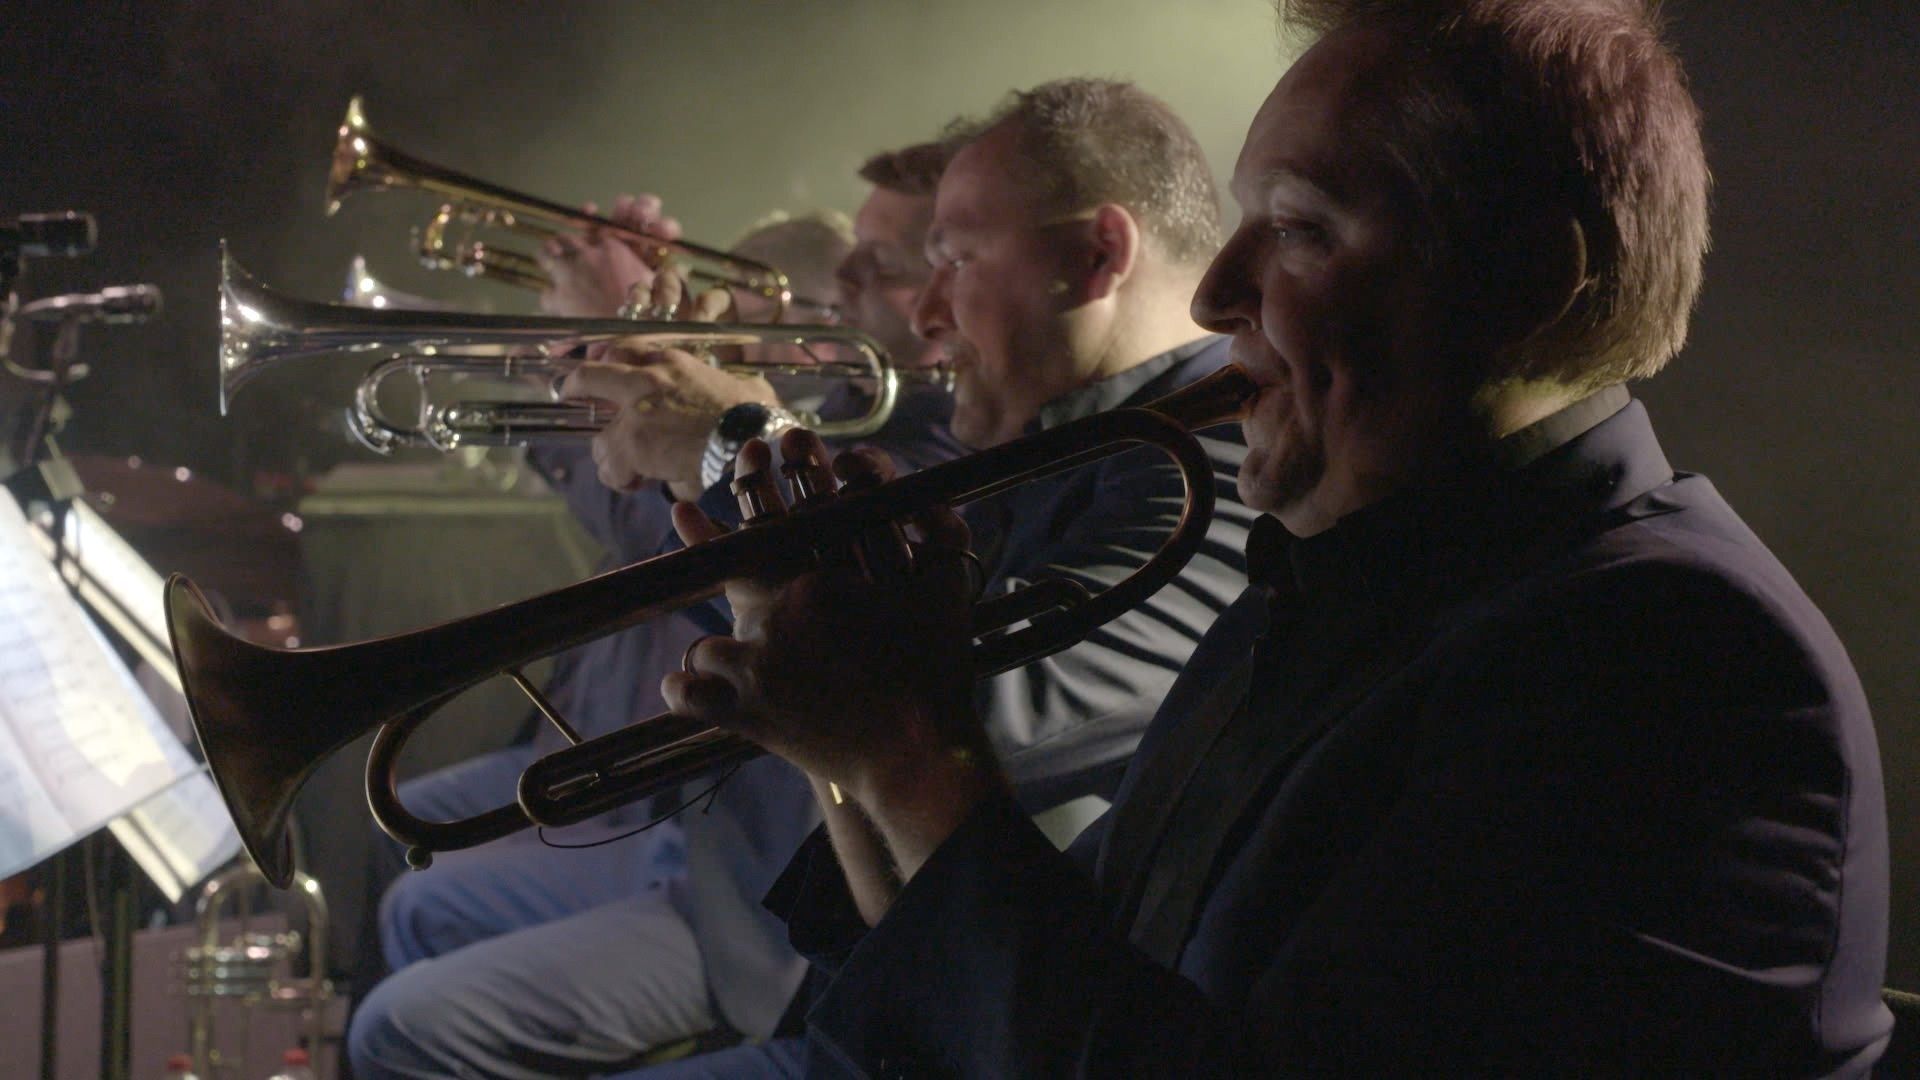 The Brussels Jazz Orchestra